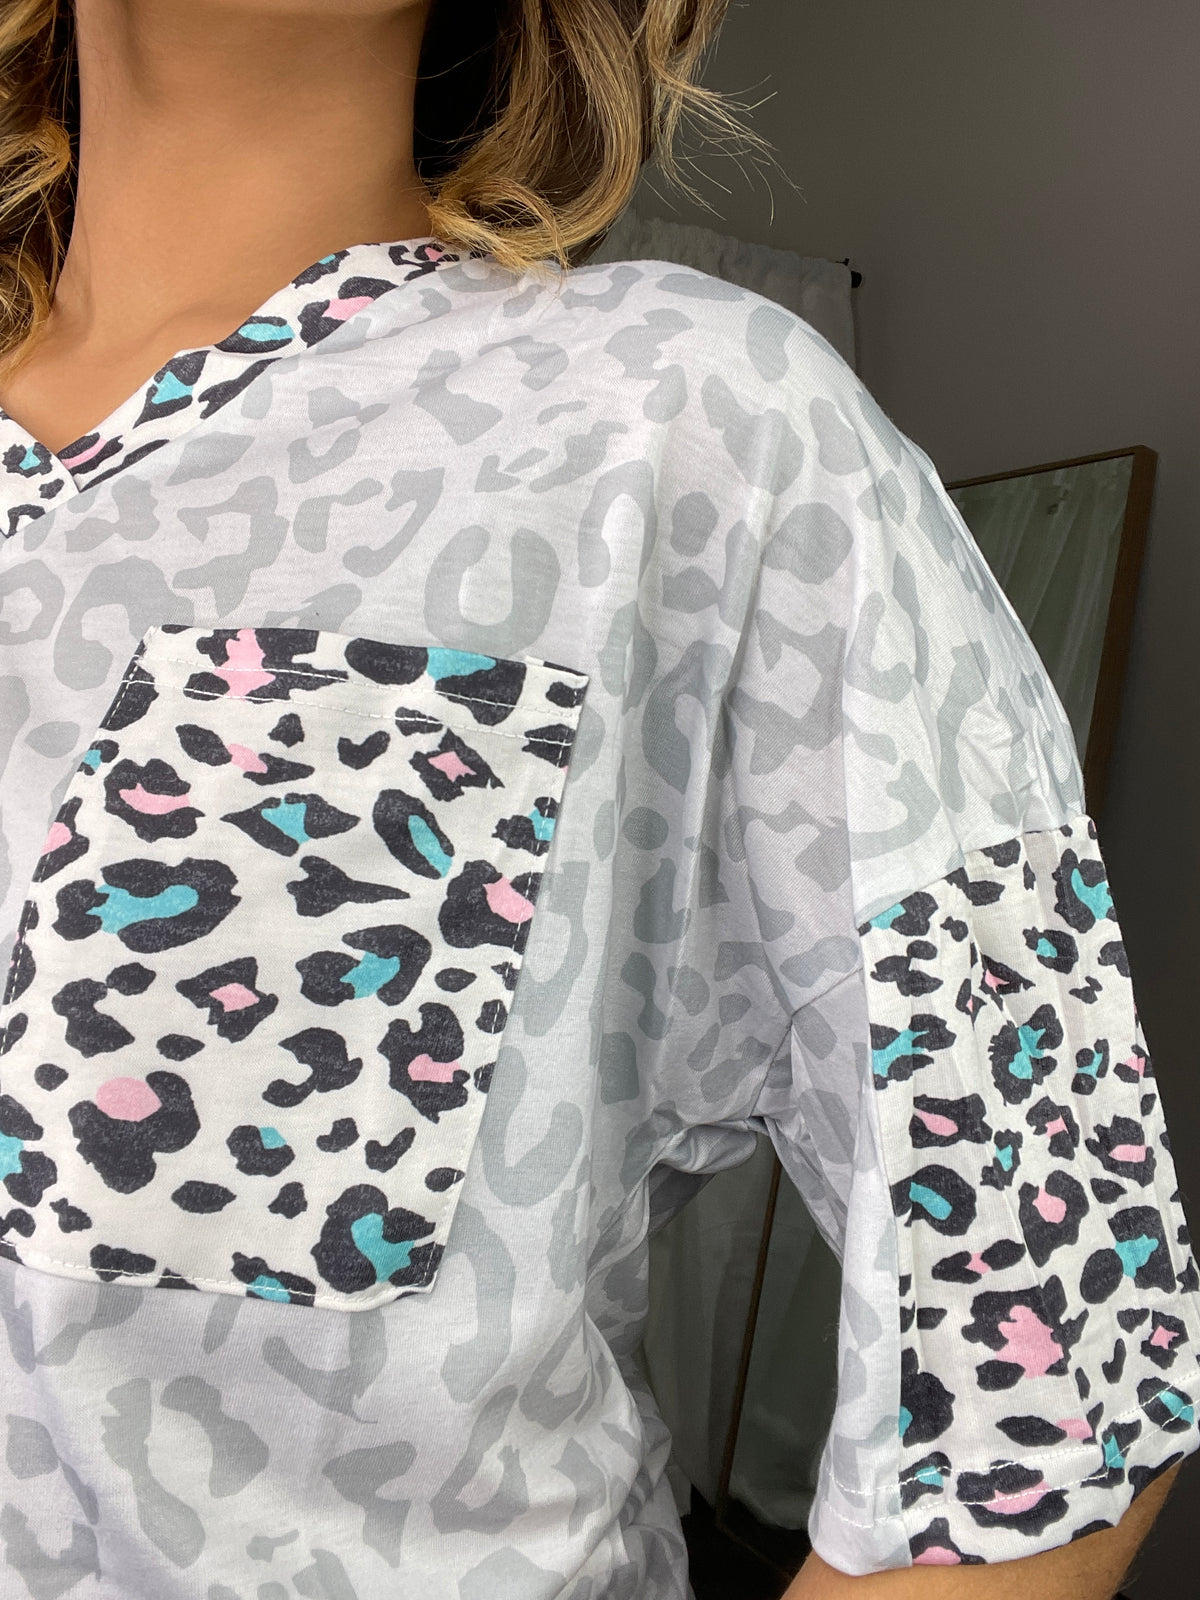 GREY LEOPARD TOP W/ COLORFUL LEOPARD ACCENTS